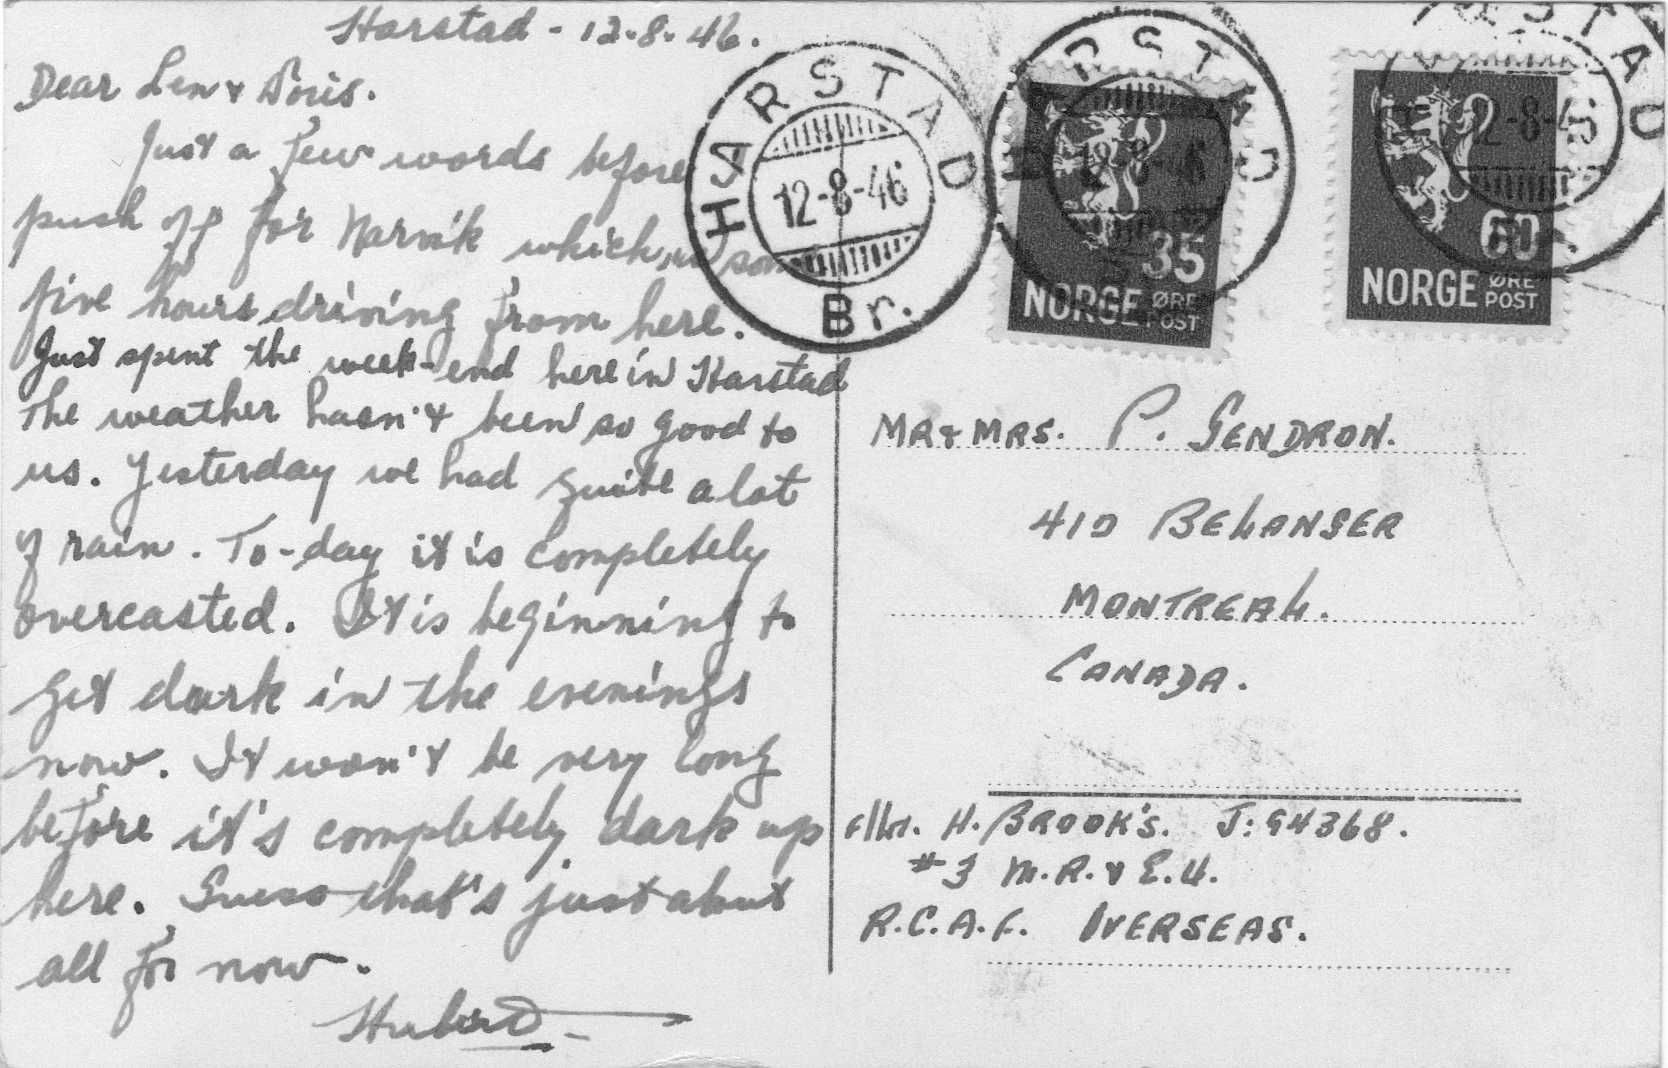 Hubert Brooks POSTCARD text to his sister from Harstad Norway